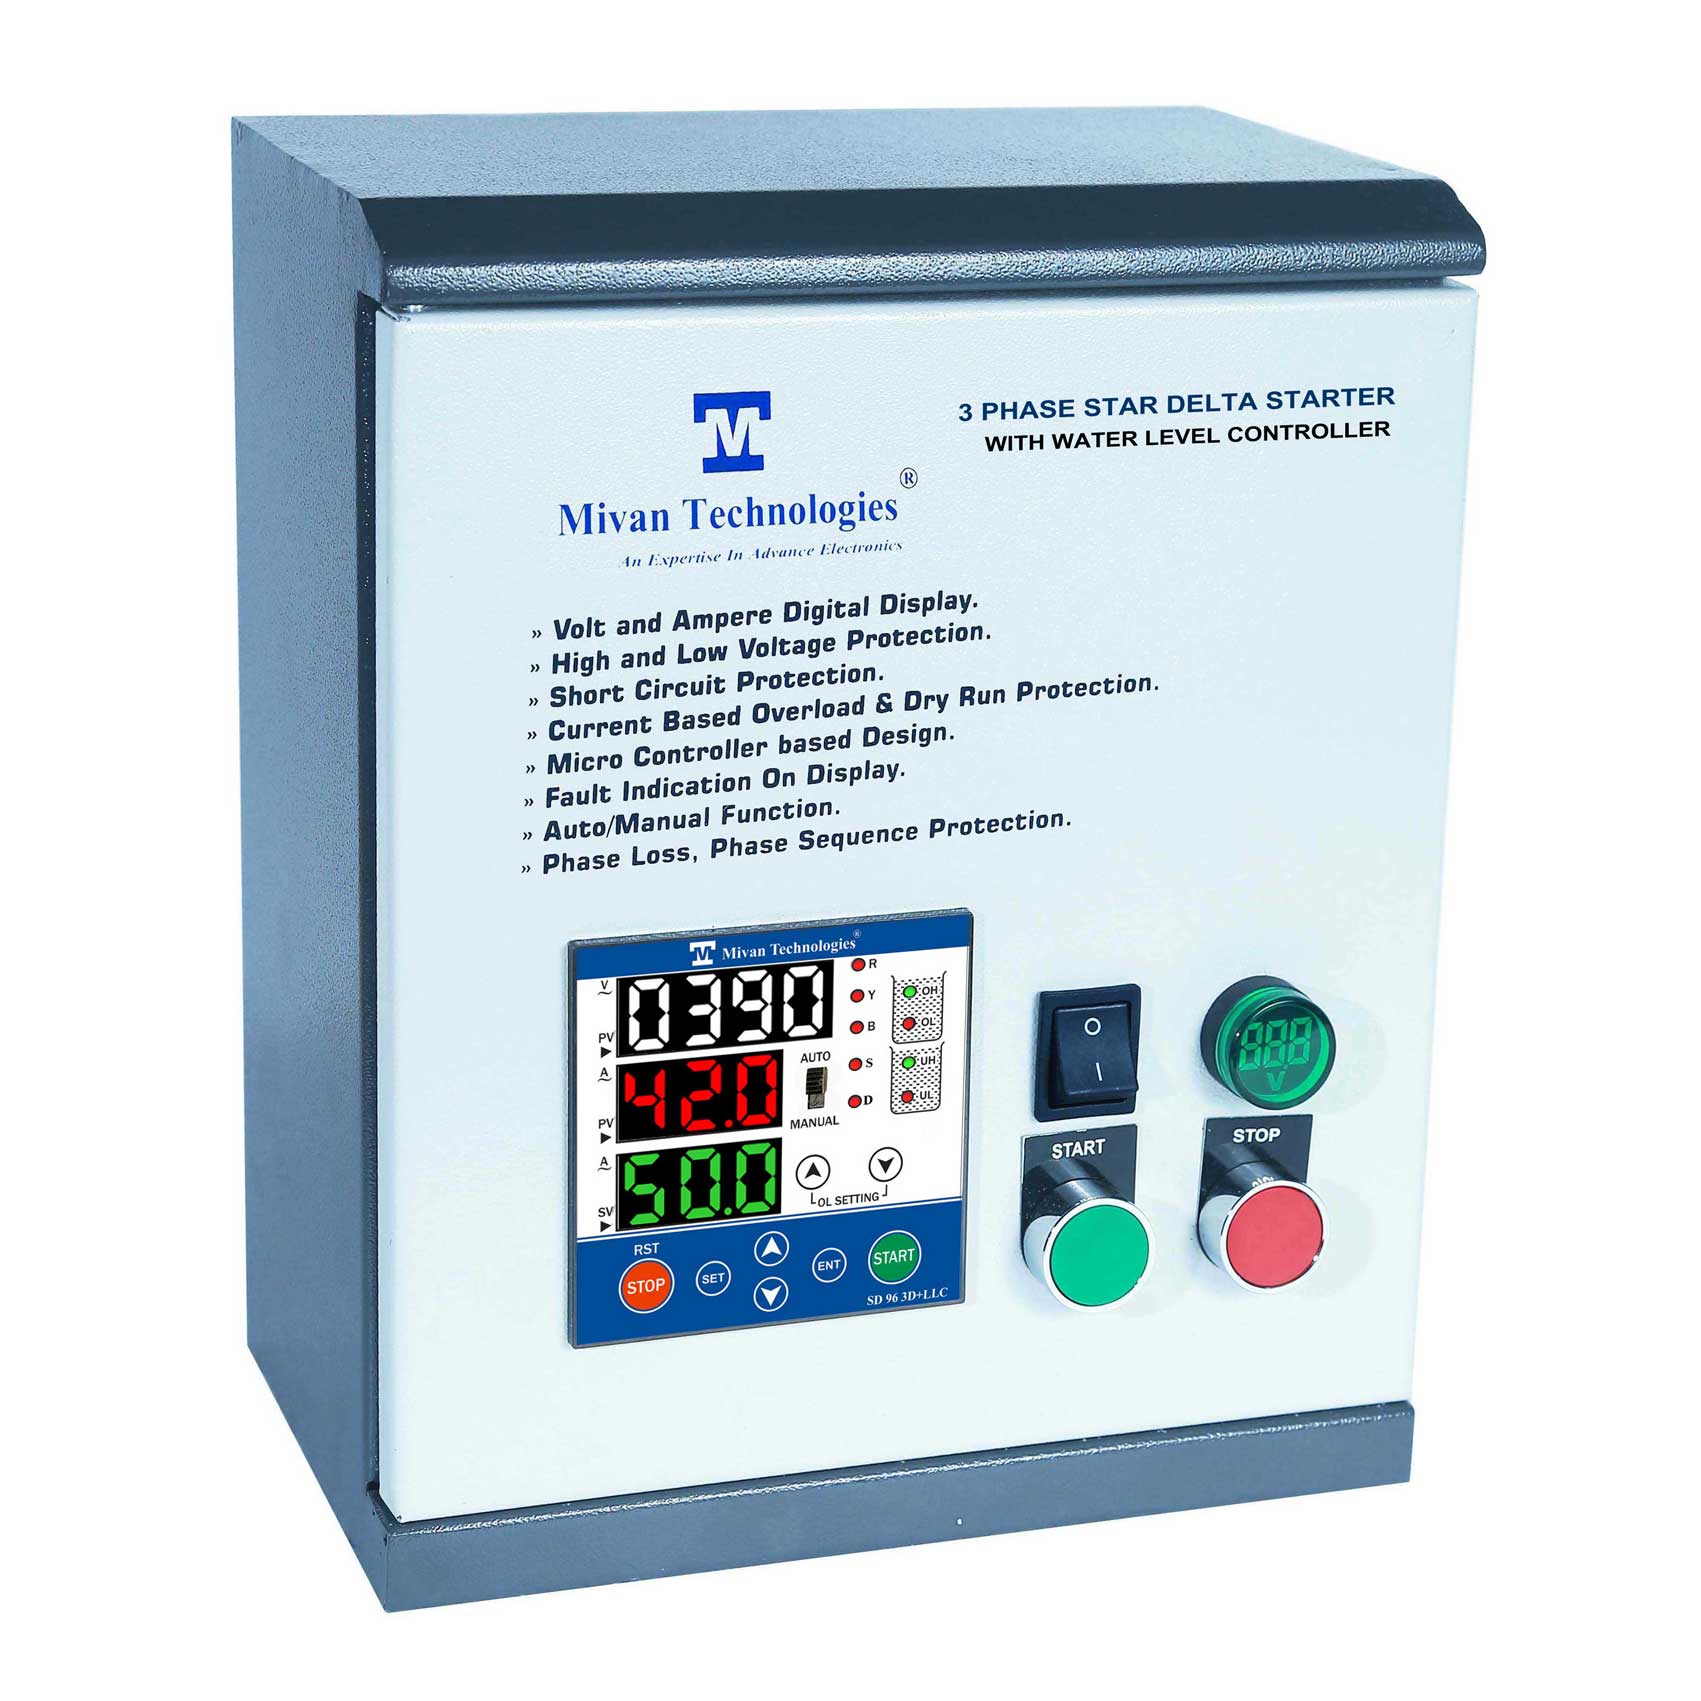 3 phase 3 display Heavy Duty water level controller with Star Delta motor starter with HV LV OL Dry protection with Auto switch spp and timer SD505040 for  25 HP motor